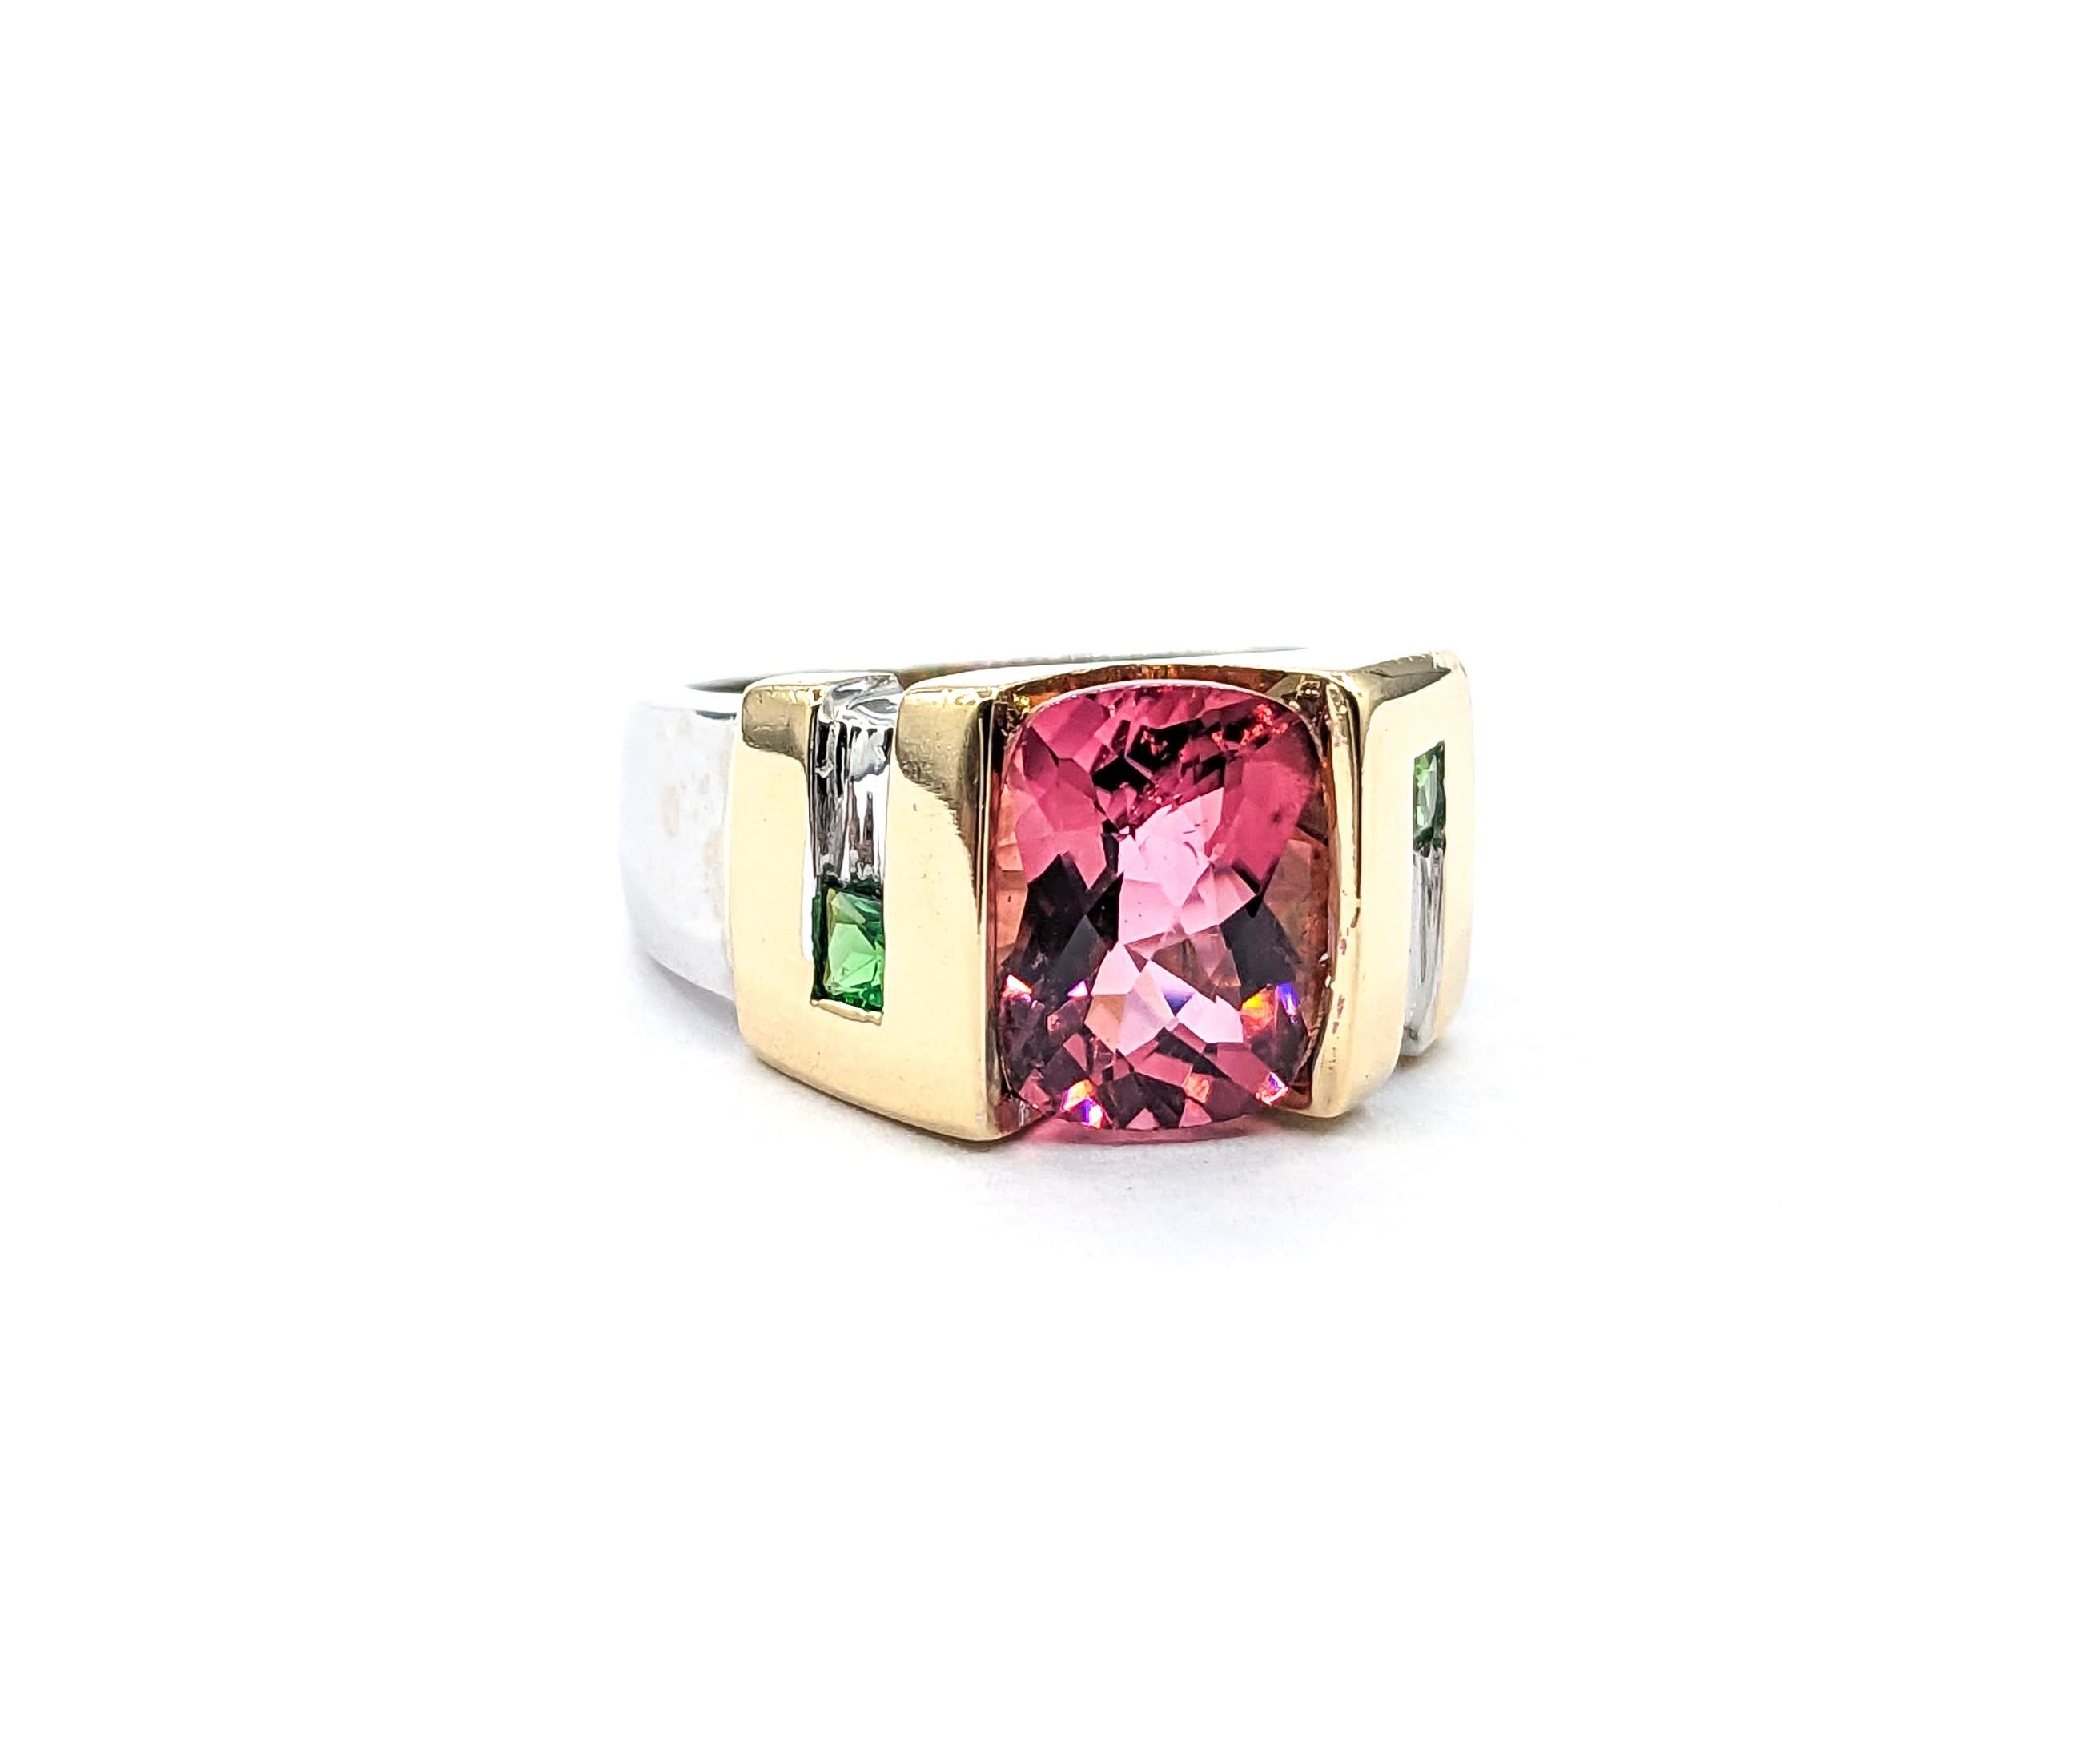 3.10ct cushion Pink Tourmaline & .18ctw Tsavorite Garnets Ring In Two-Tone Gold For Sale 3